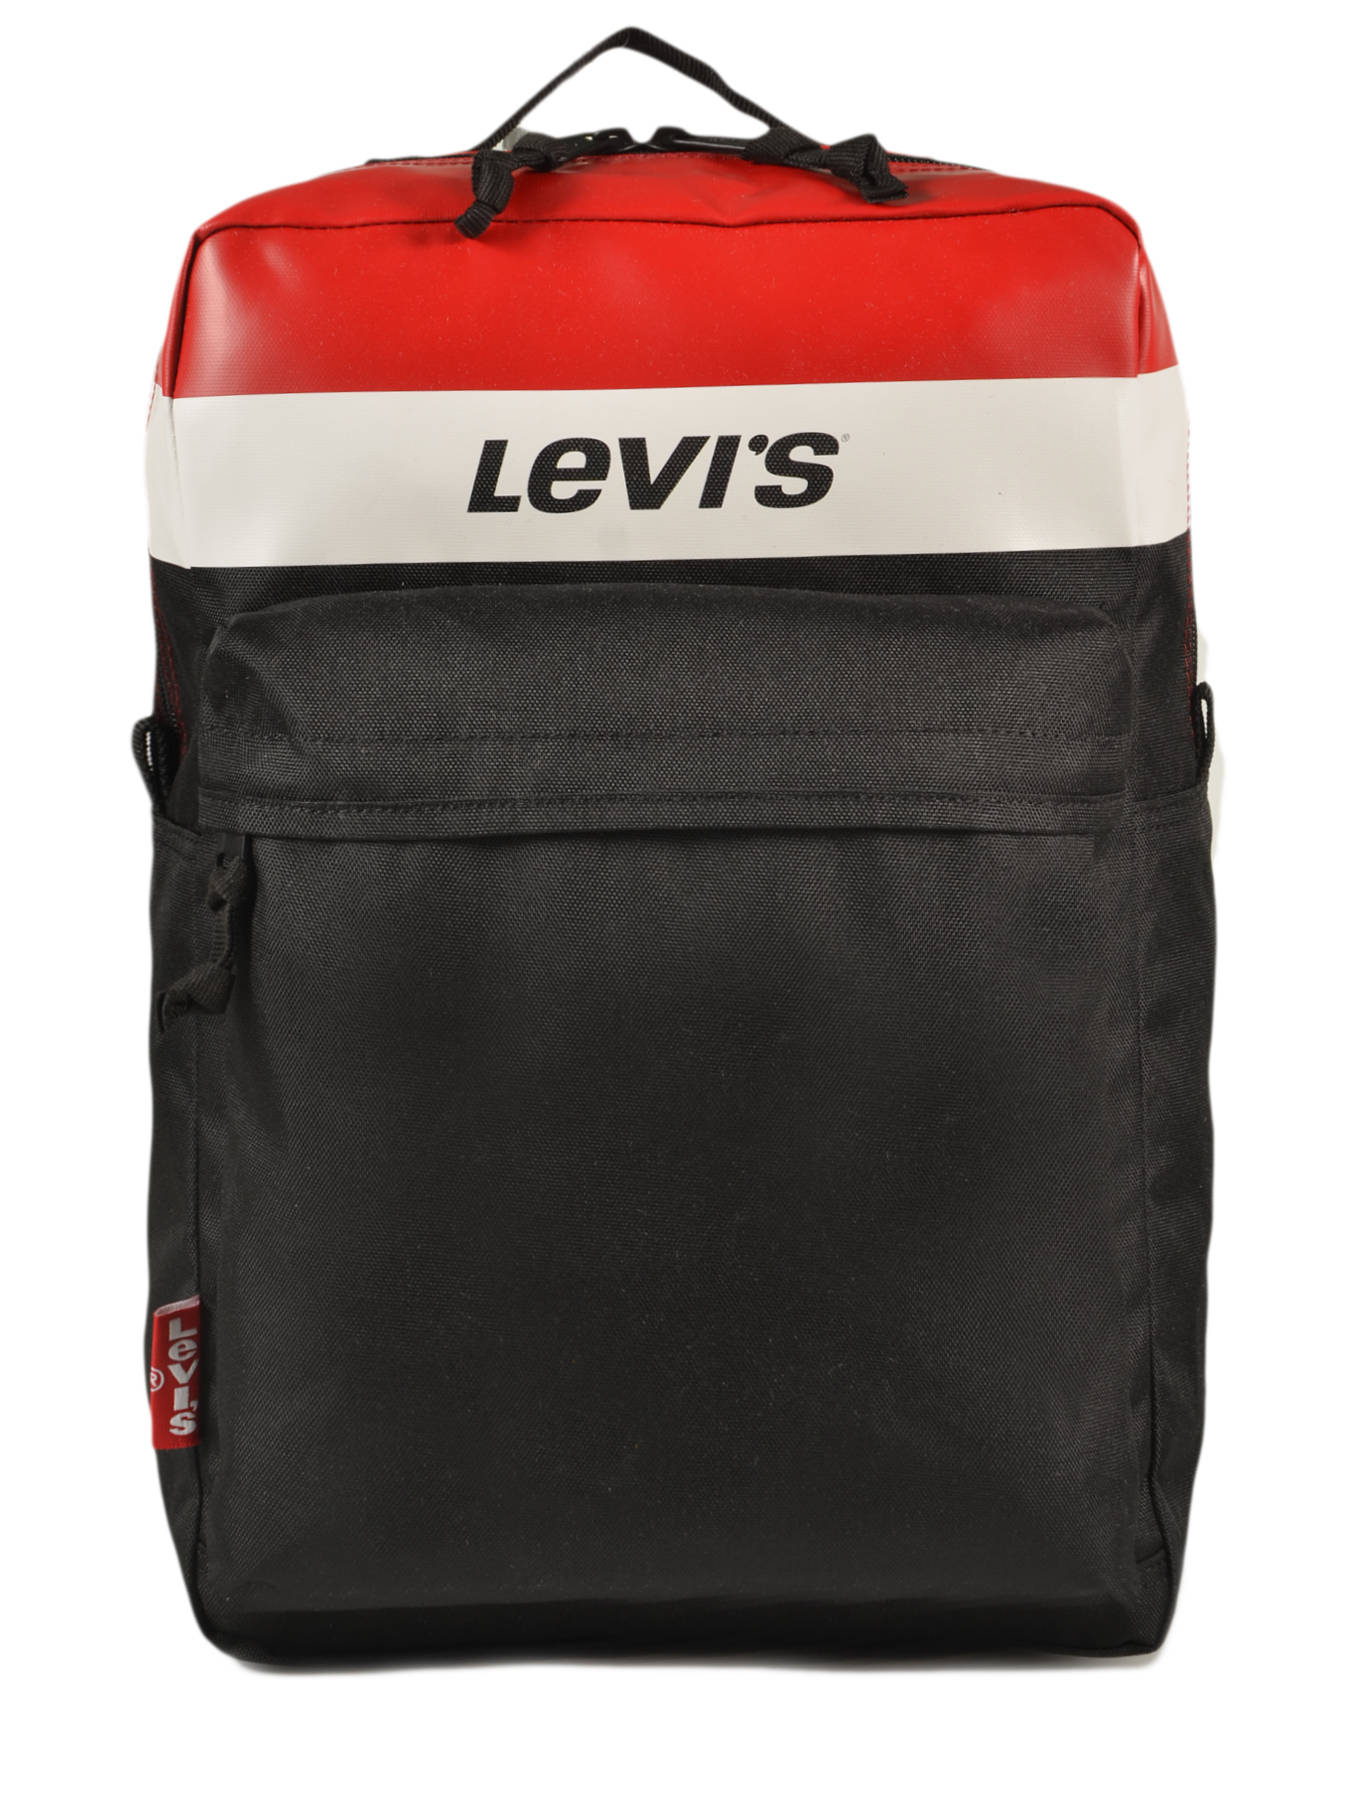 Levi's Backpack 230904 - best prices